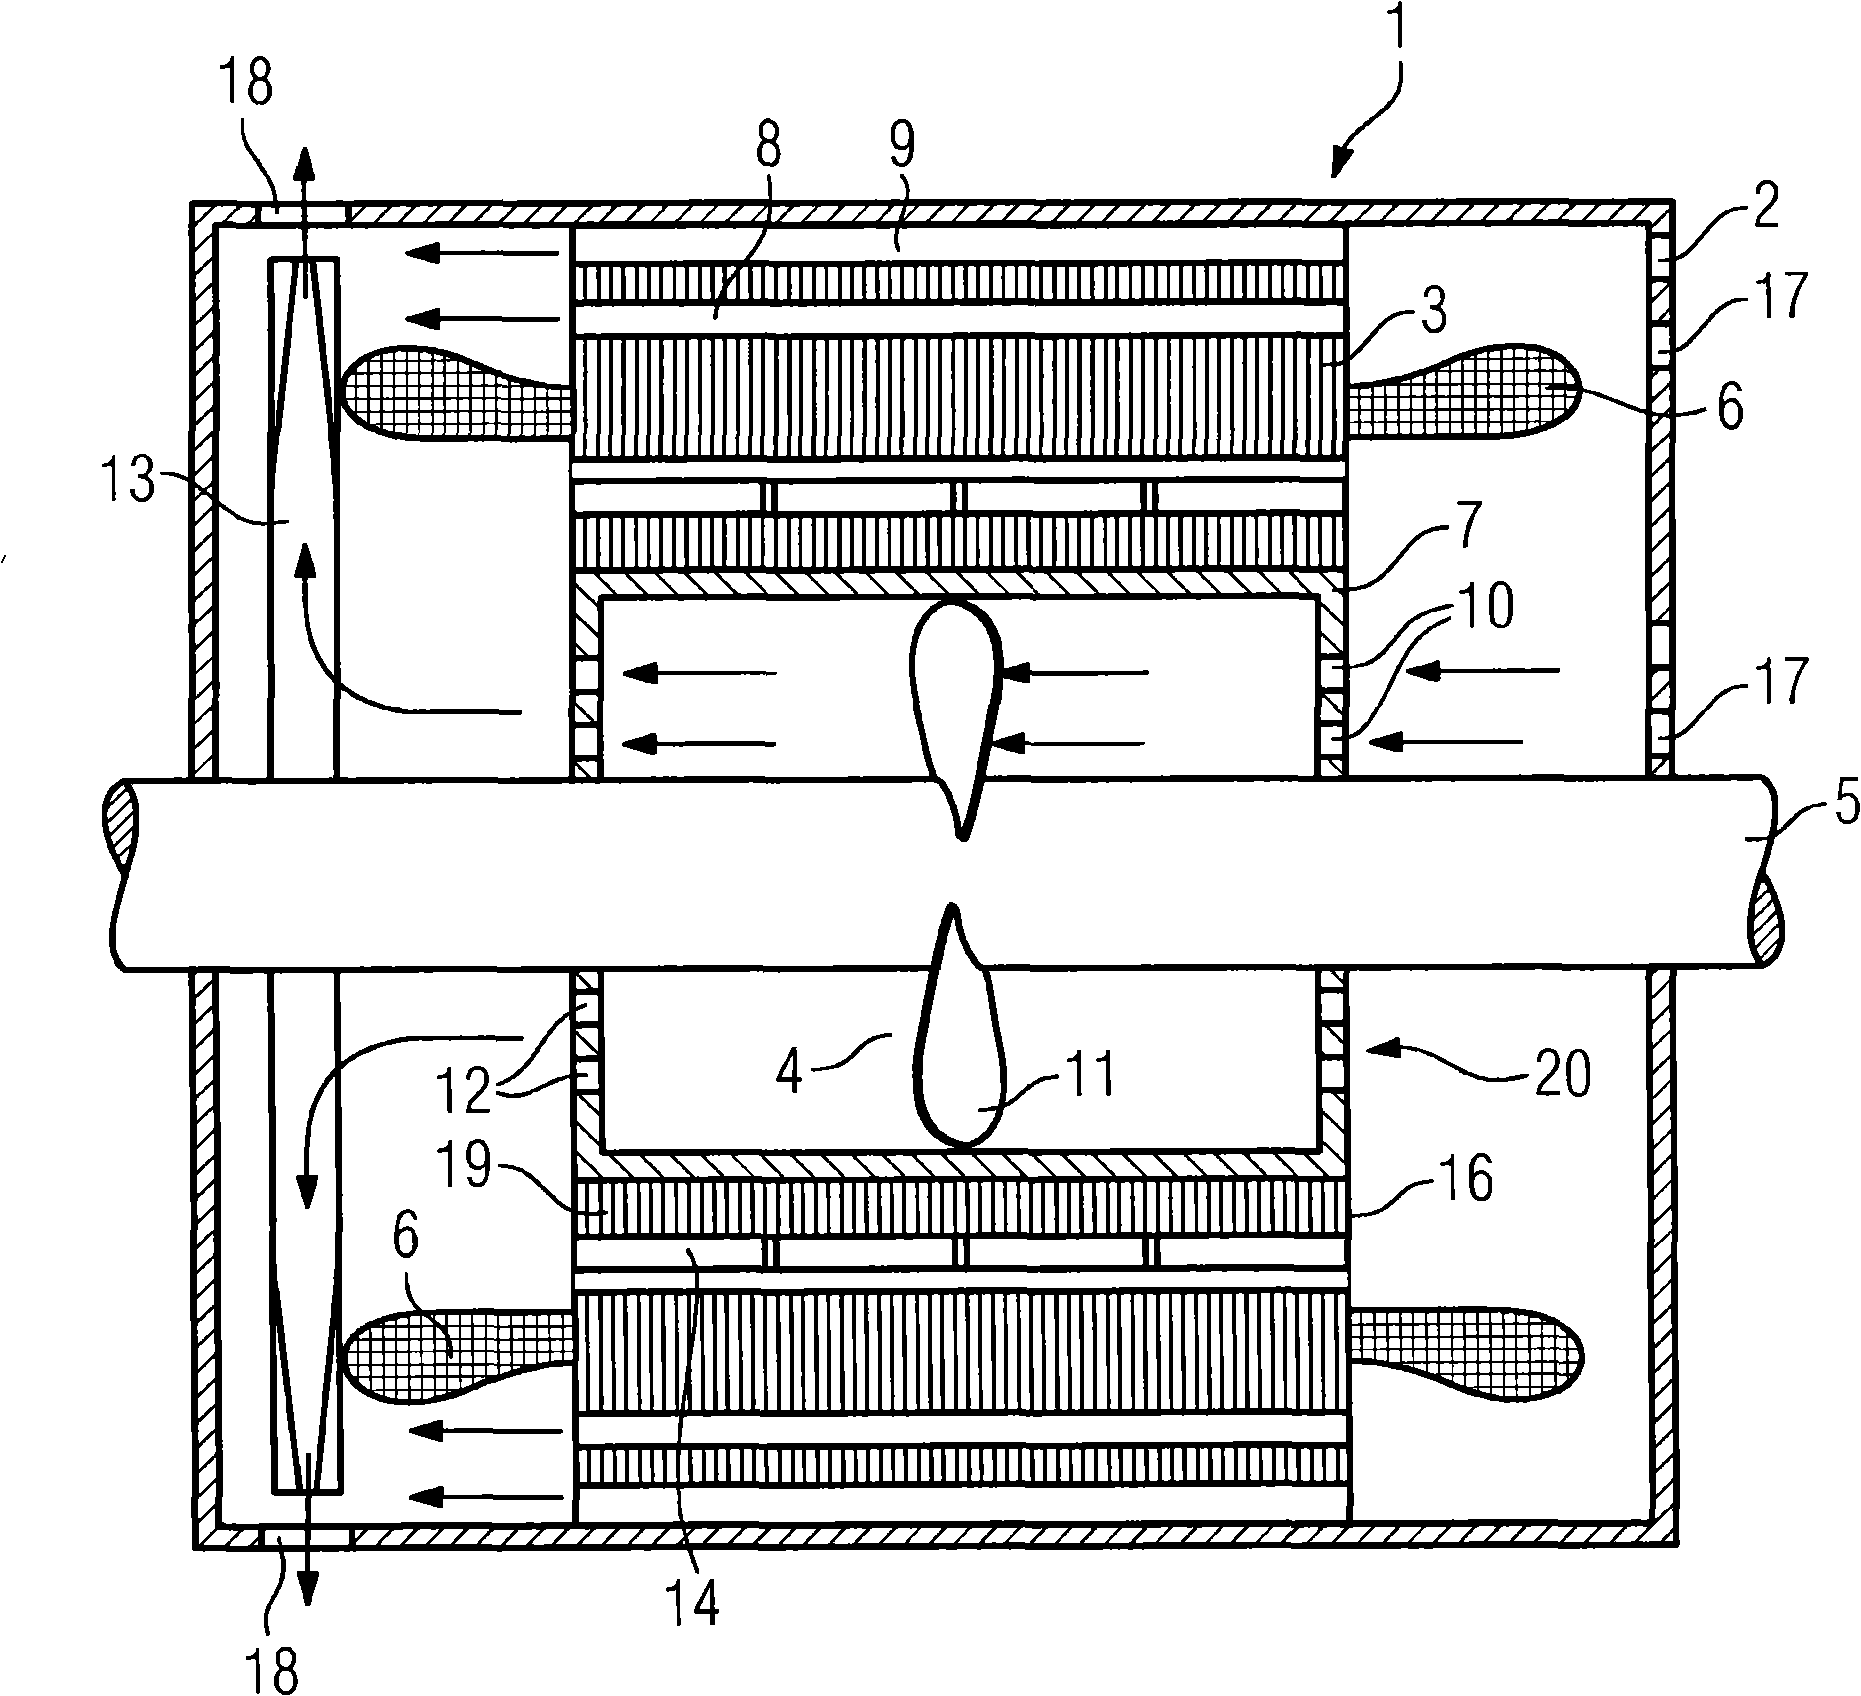 Electrical machine having permanent magnets